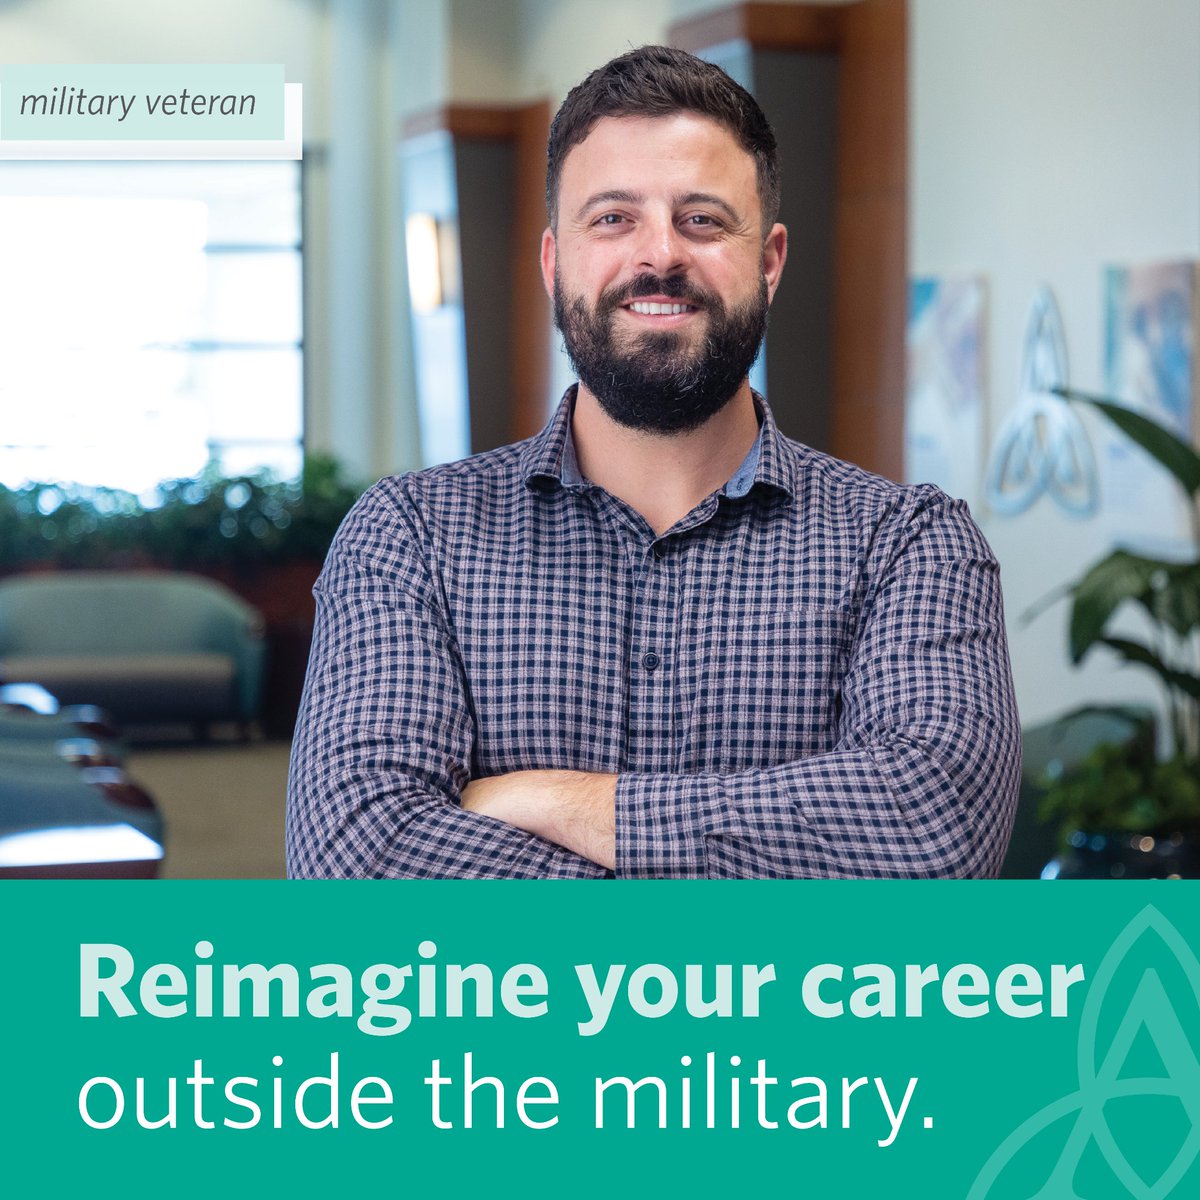 You deserve a career that supports you in every stage of your life. Discover why Ascension was named a Military Friendly® Employer and a Military Spouse Friendly® Employer for 2021, 2022 and 2023: ascn.io/6019Zp63X #AscensionCareers